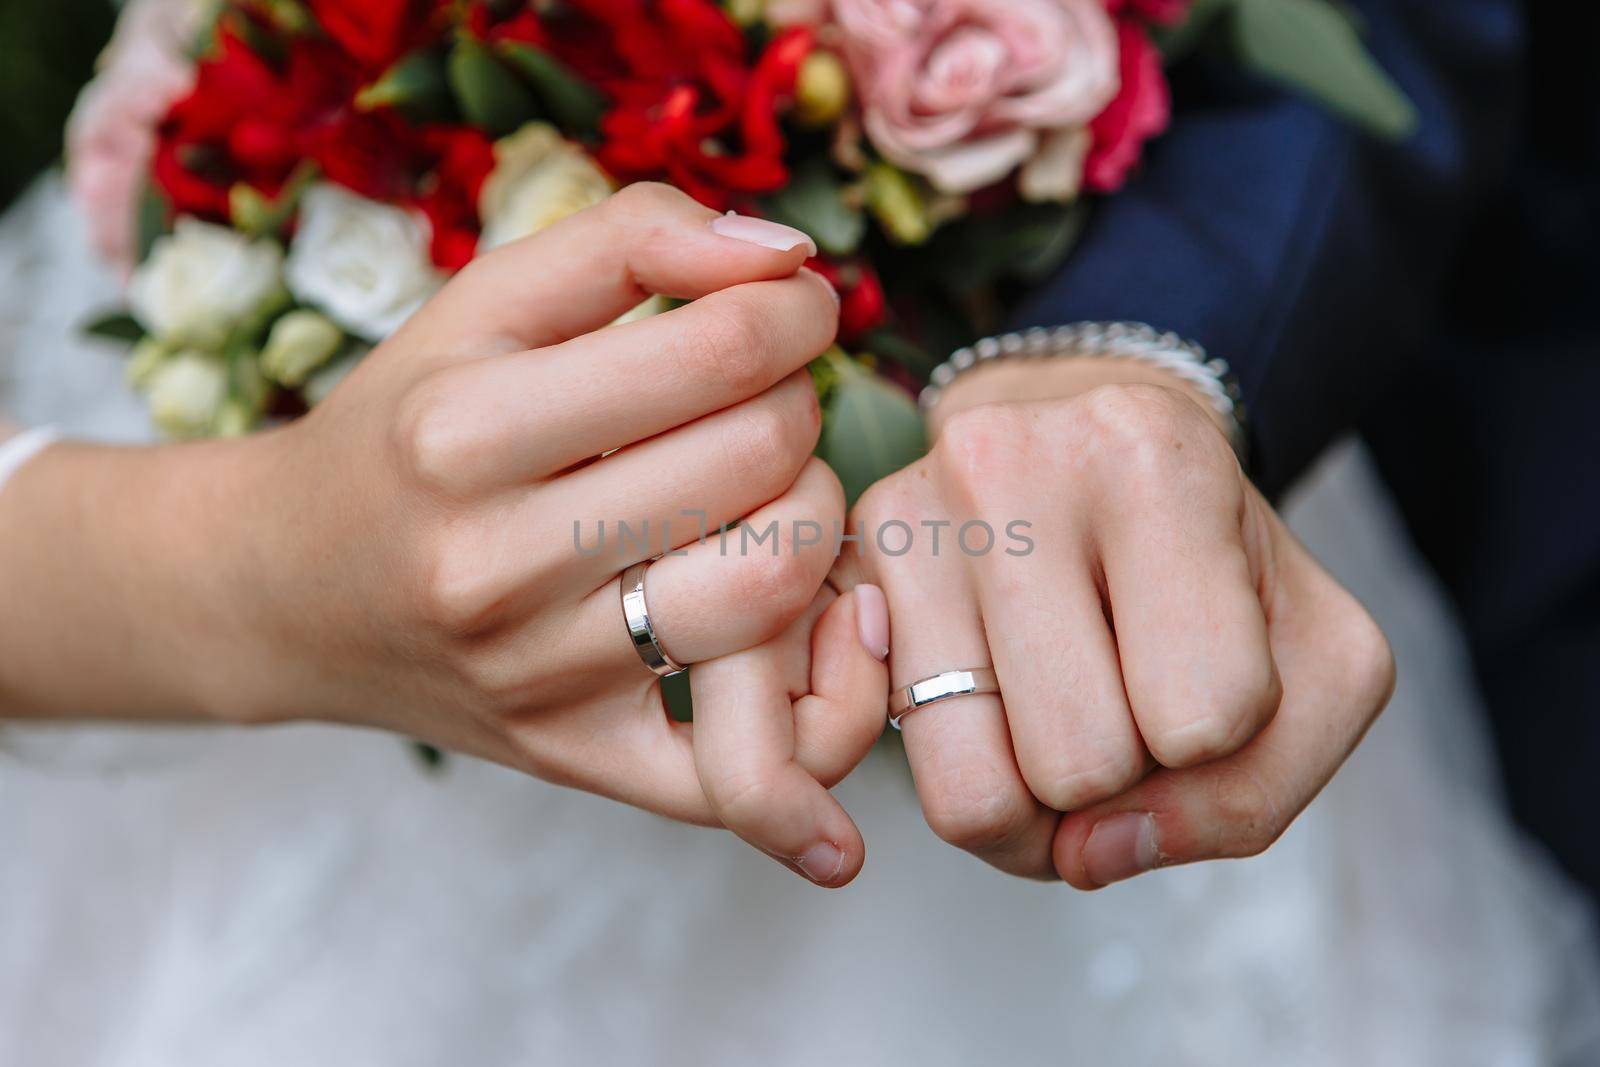 The hands of the newlyweds, who are holding on to the little fingers by deandy